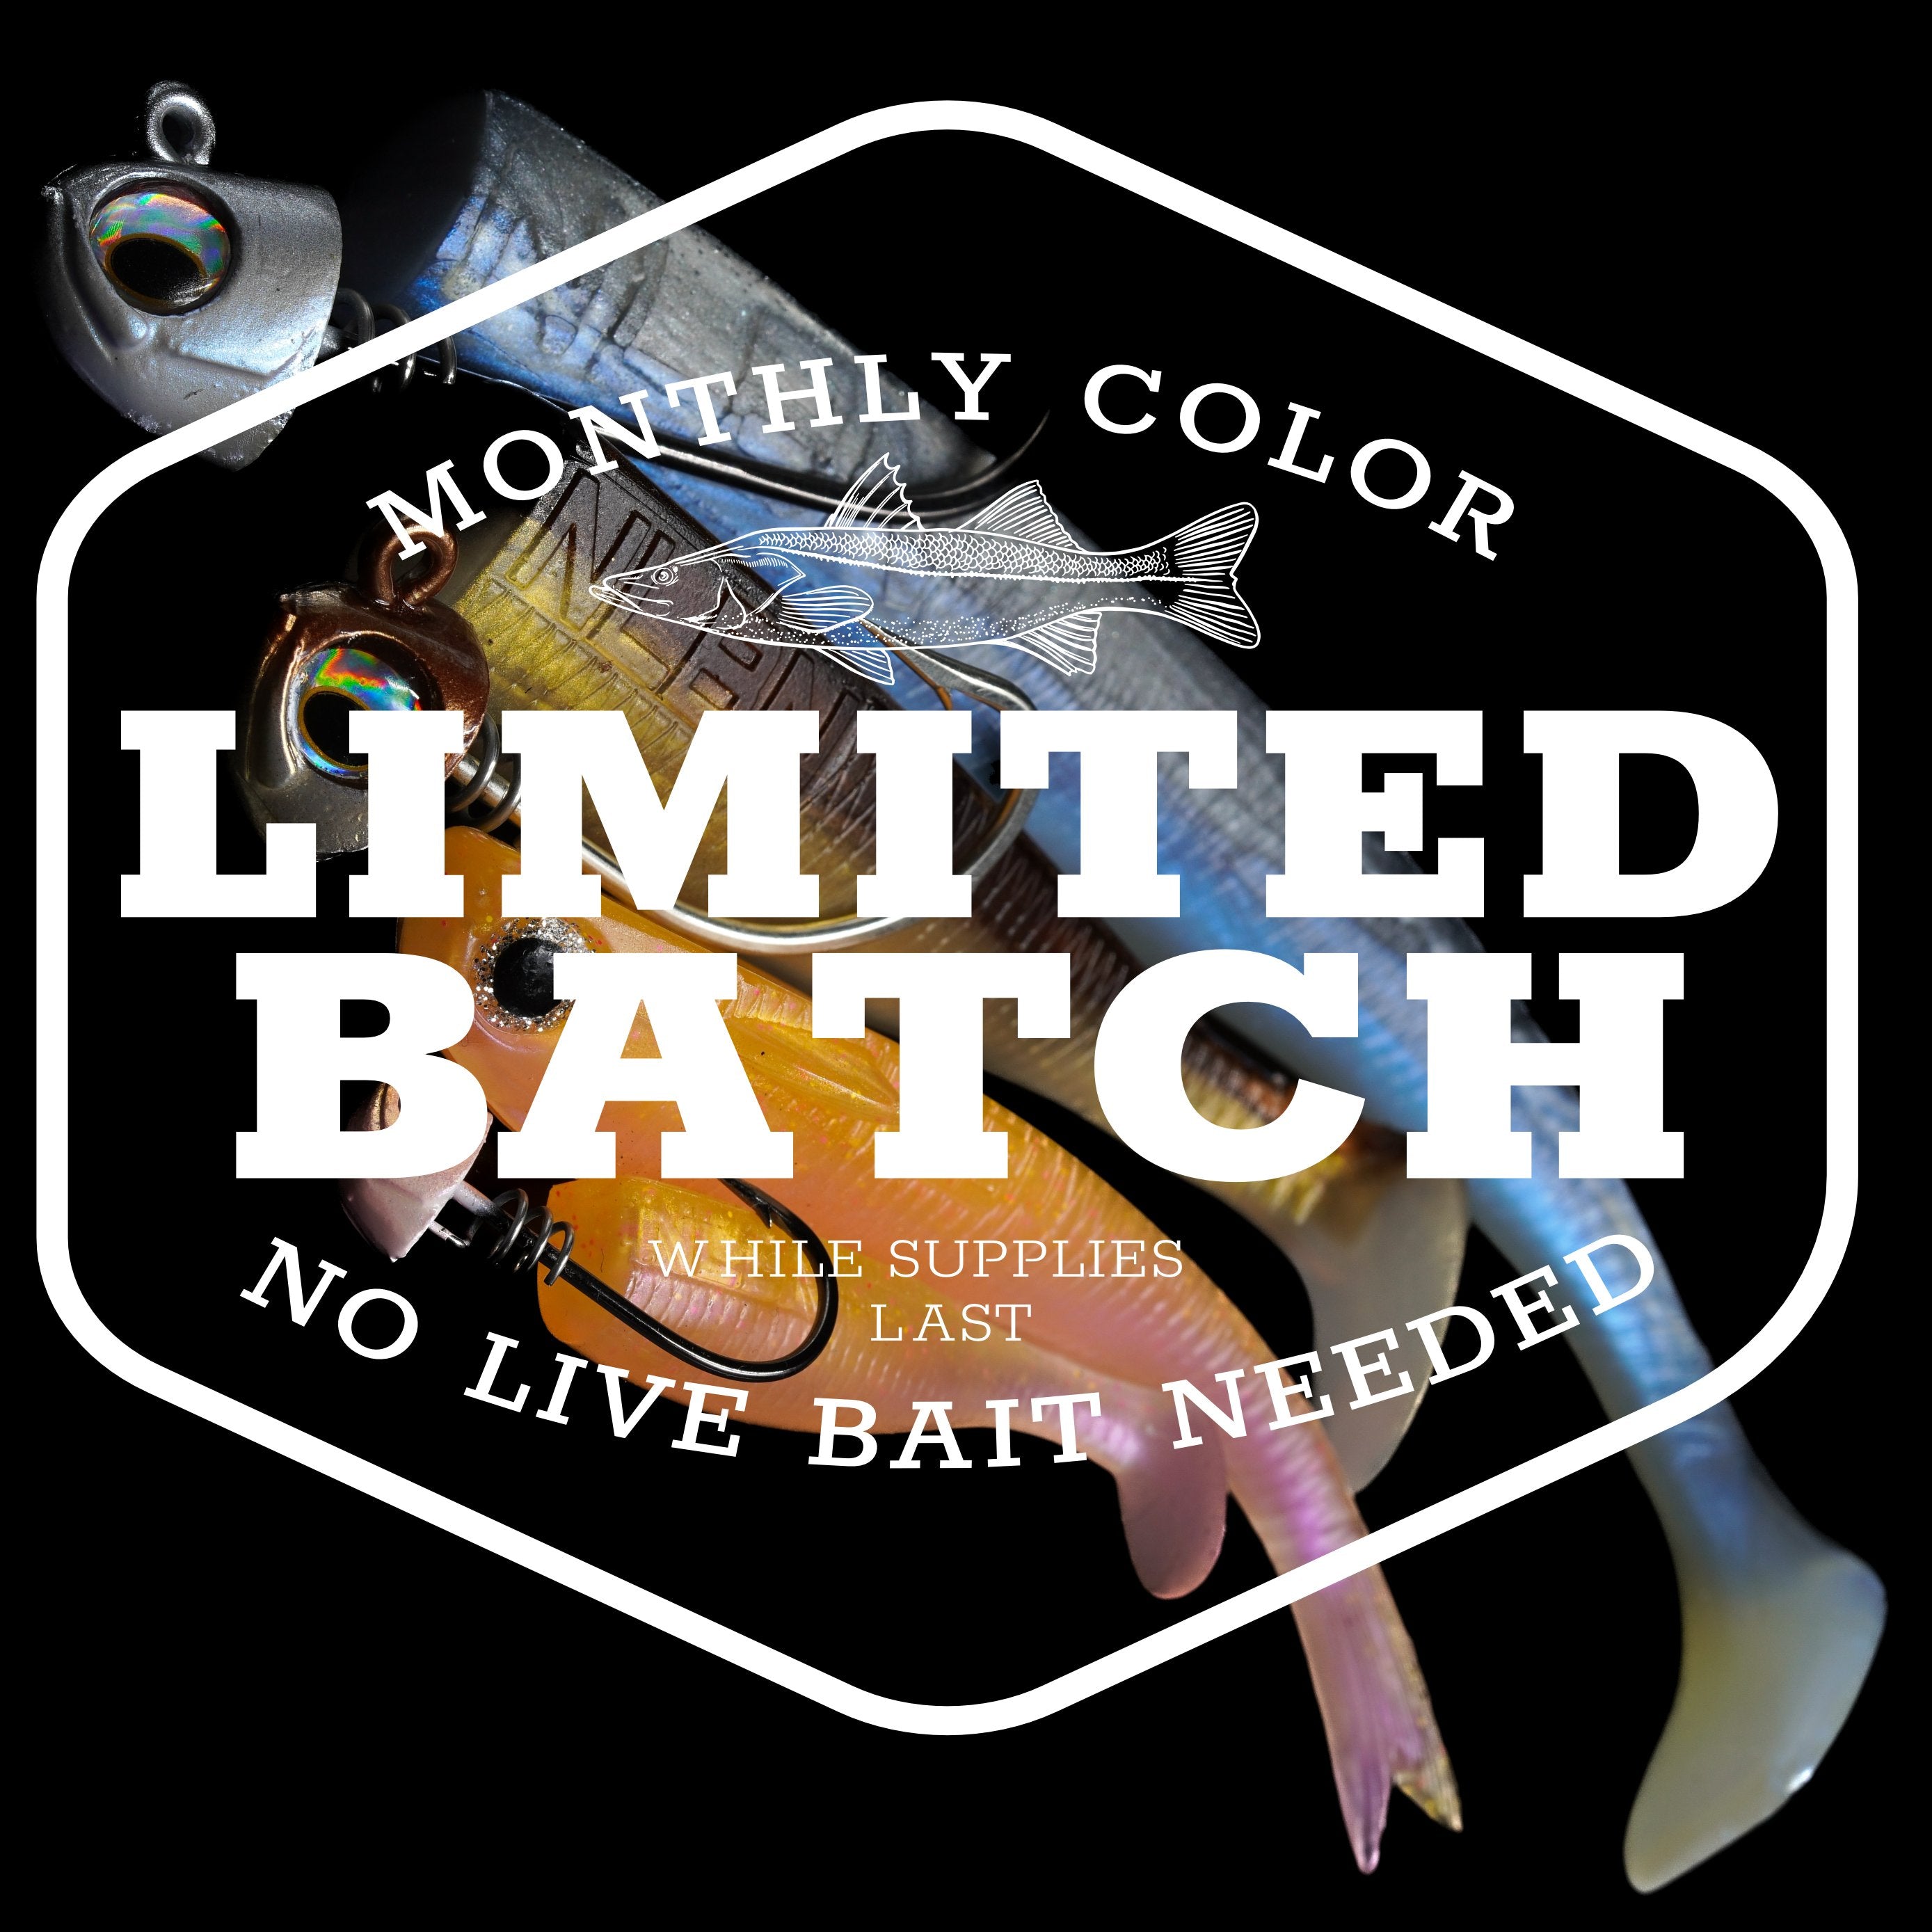 Limited Batch – No Live Bait Needed